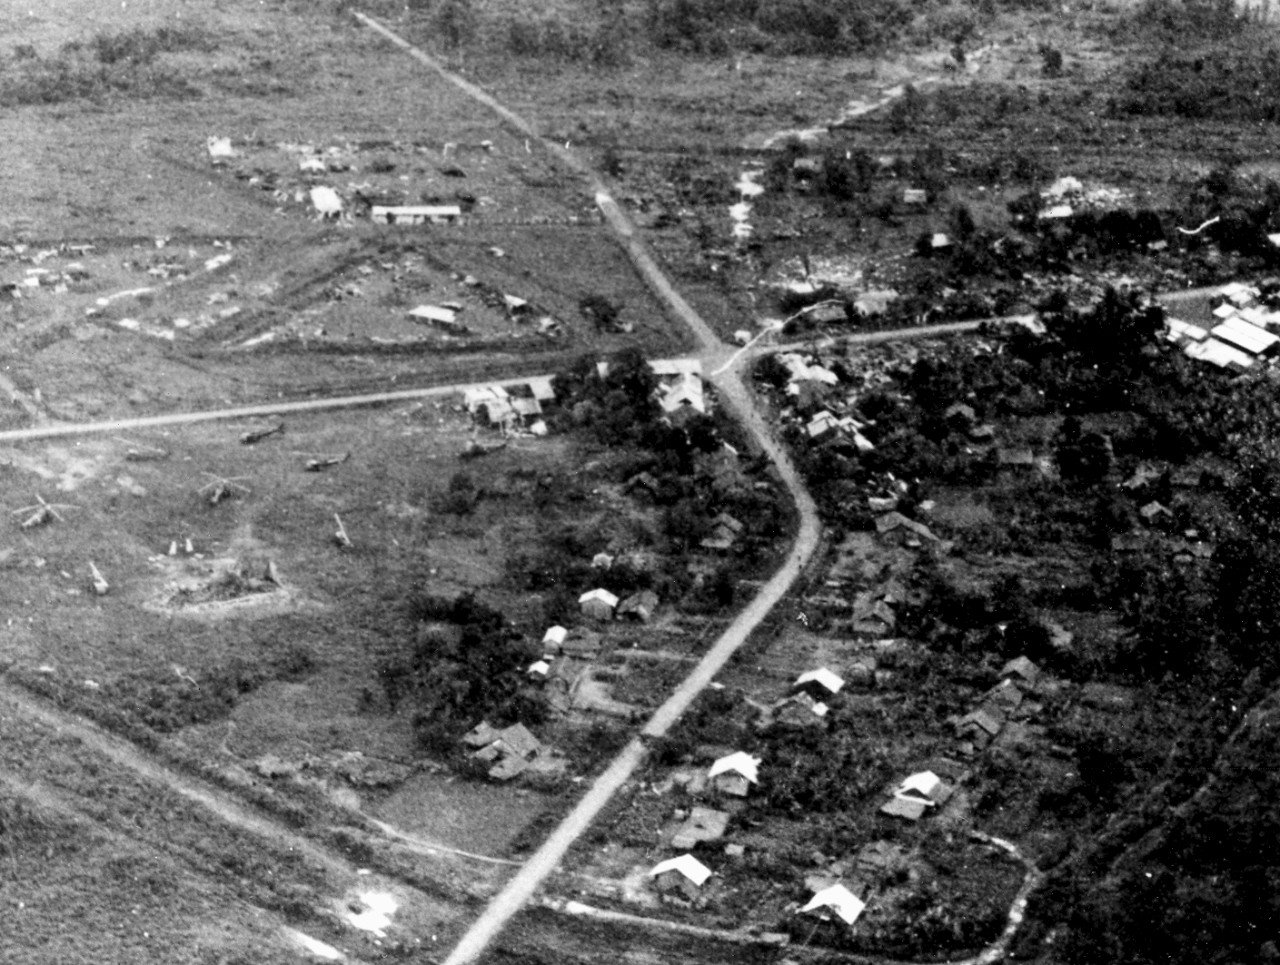 Special Forces camp at Dong Xoai after the Viet Cong attack, June 1965. The Special Forces compound supported three CIDG companies: a Regional Forces company, a small Vietnamese Special Forces detachment, and an armored car platoon.  The Viet Con...